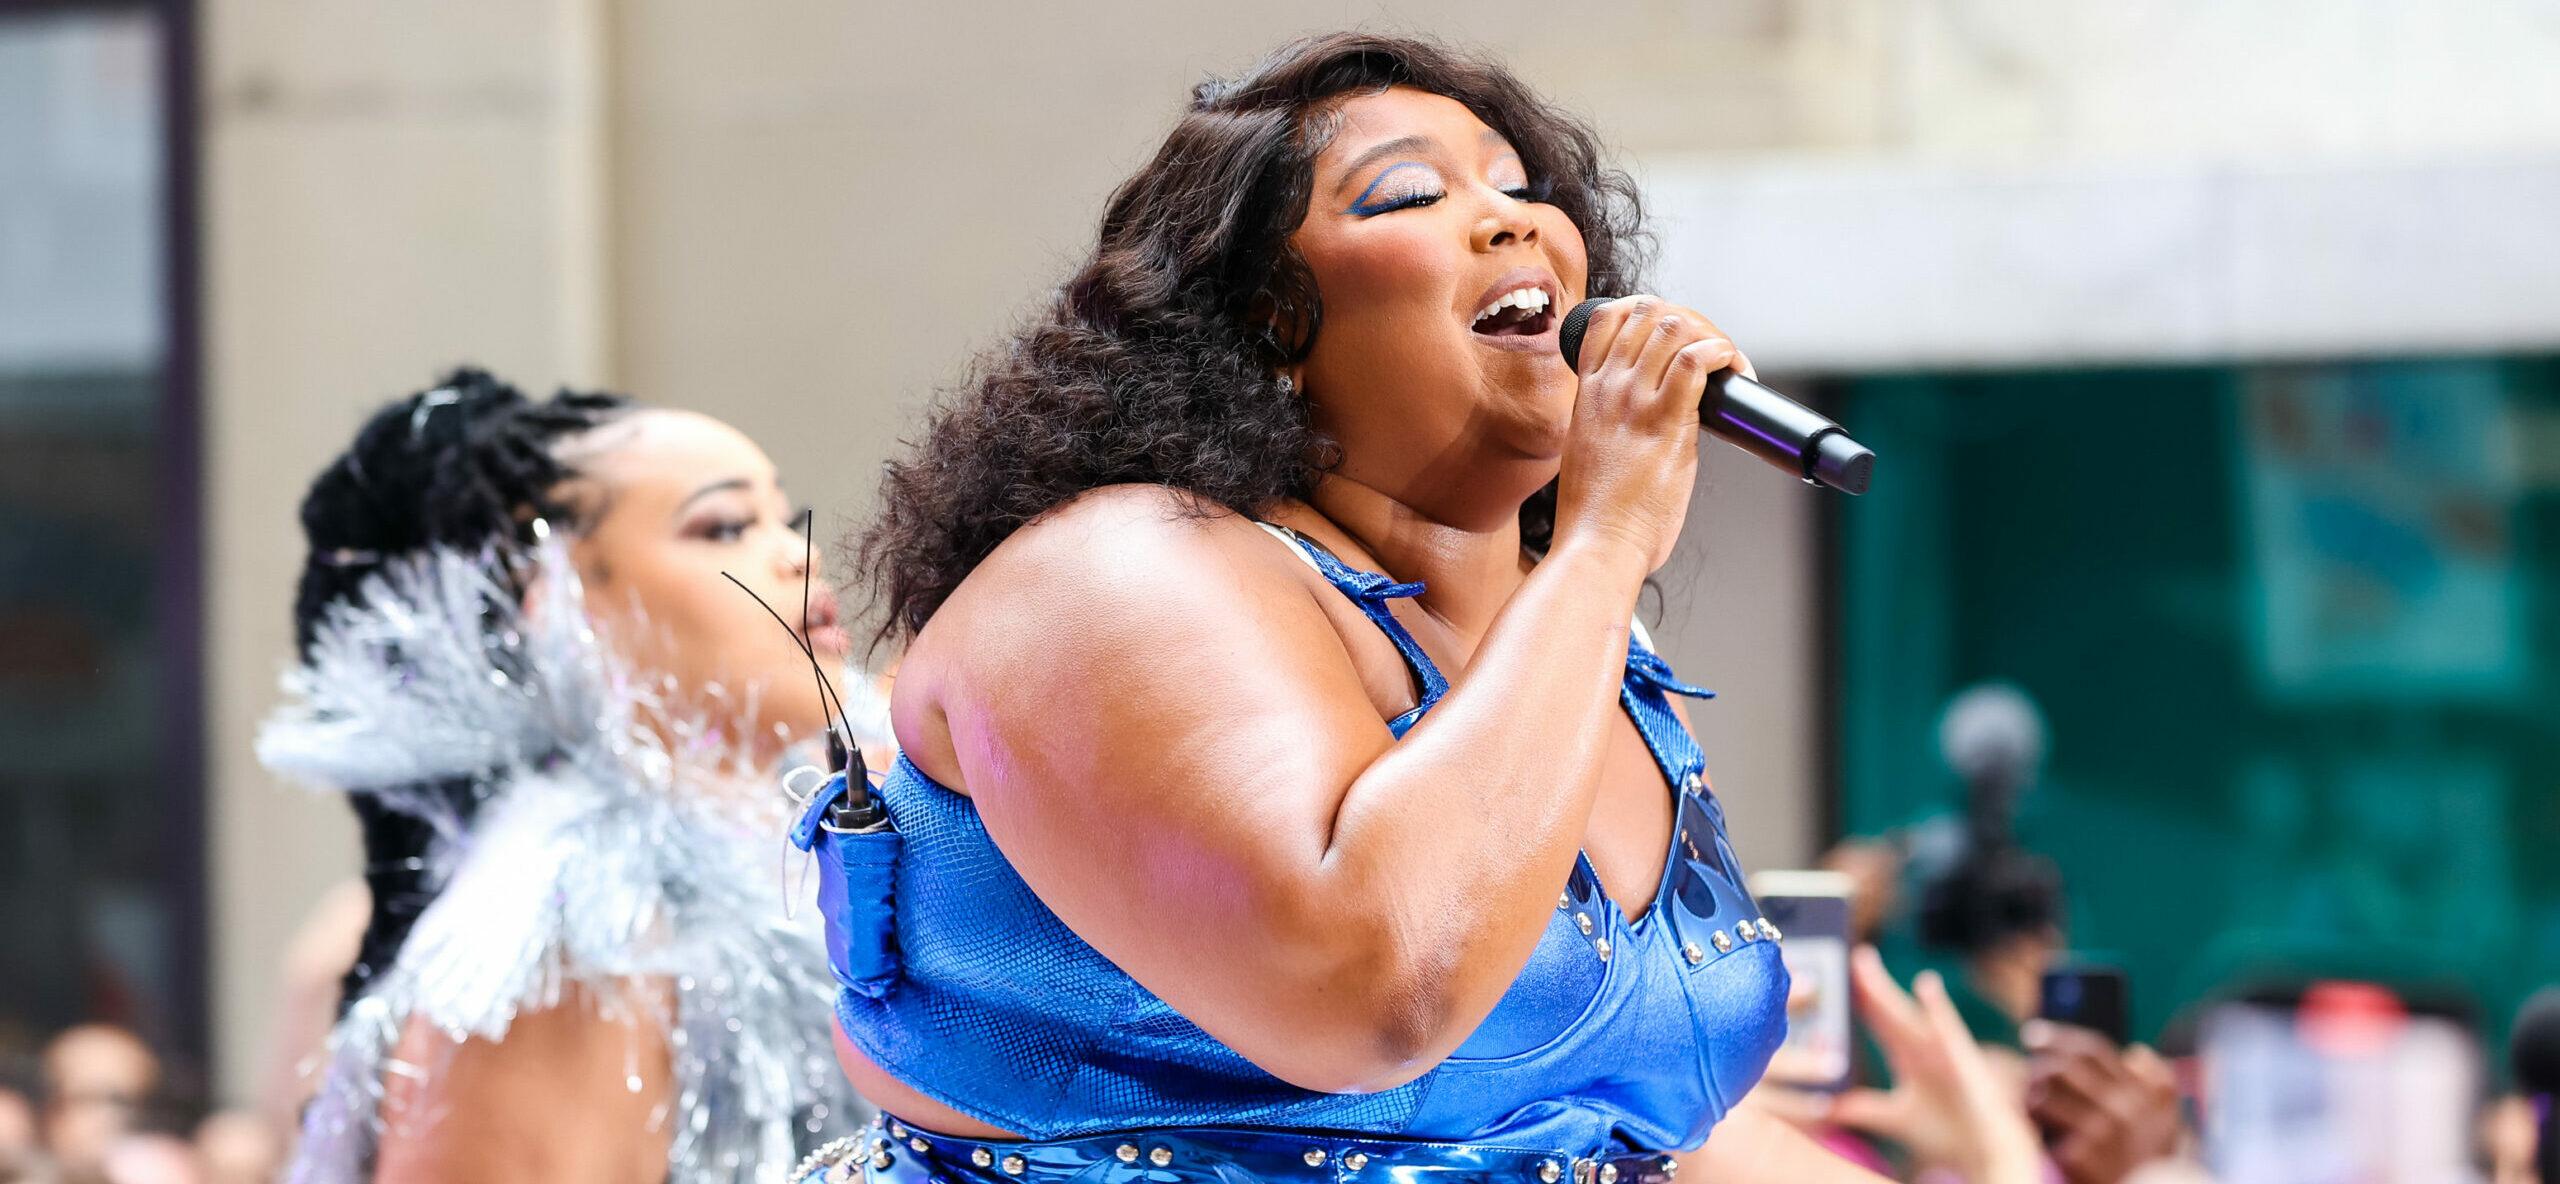 Lizzo at the Citi Concert Series for the apos Today apos show